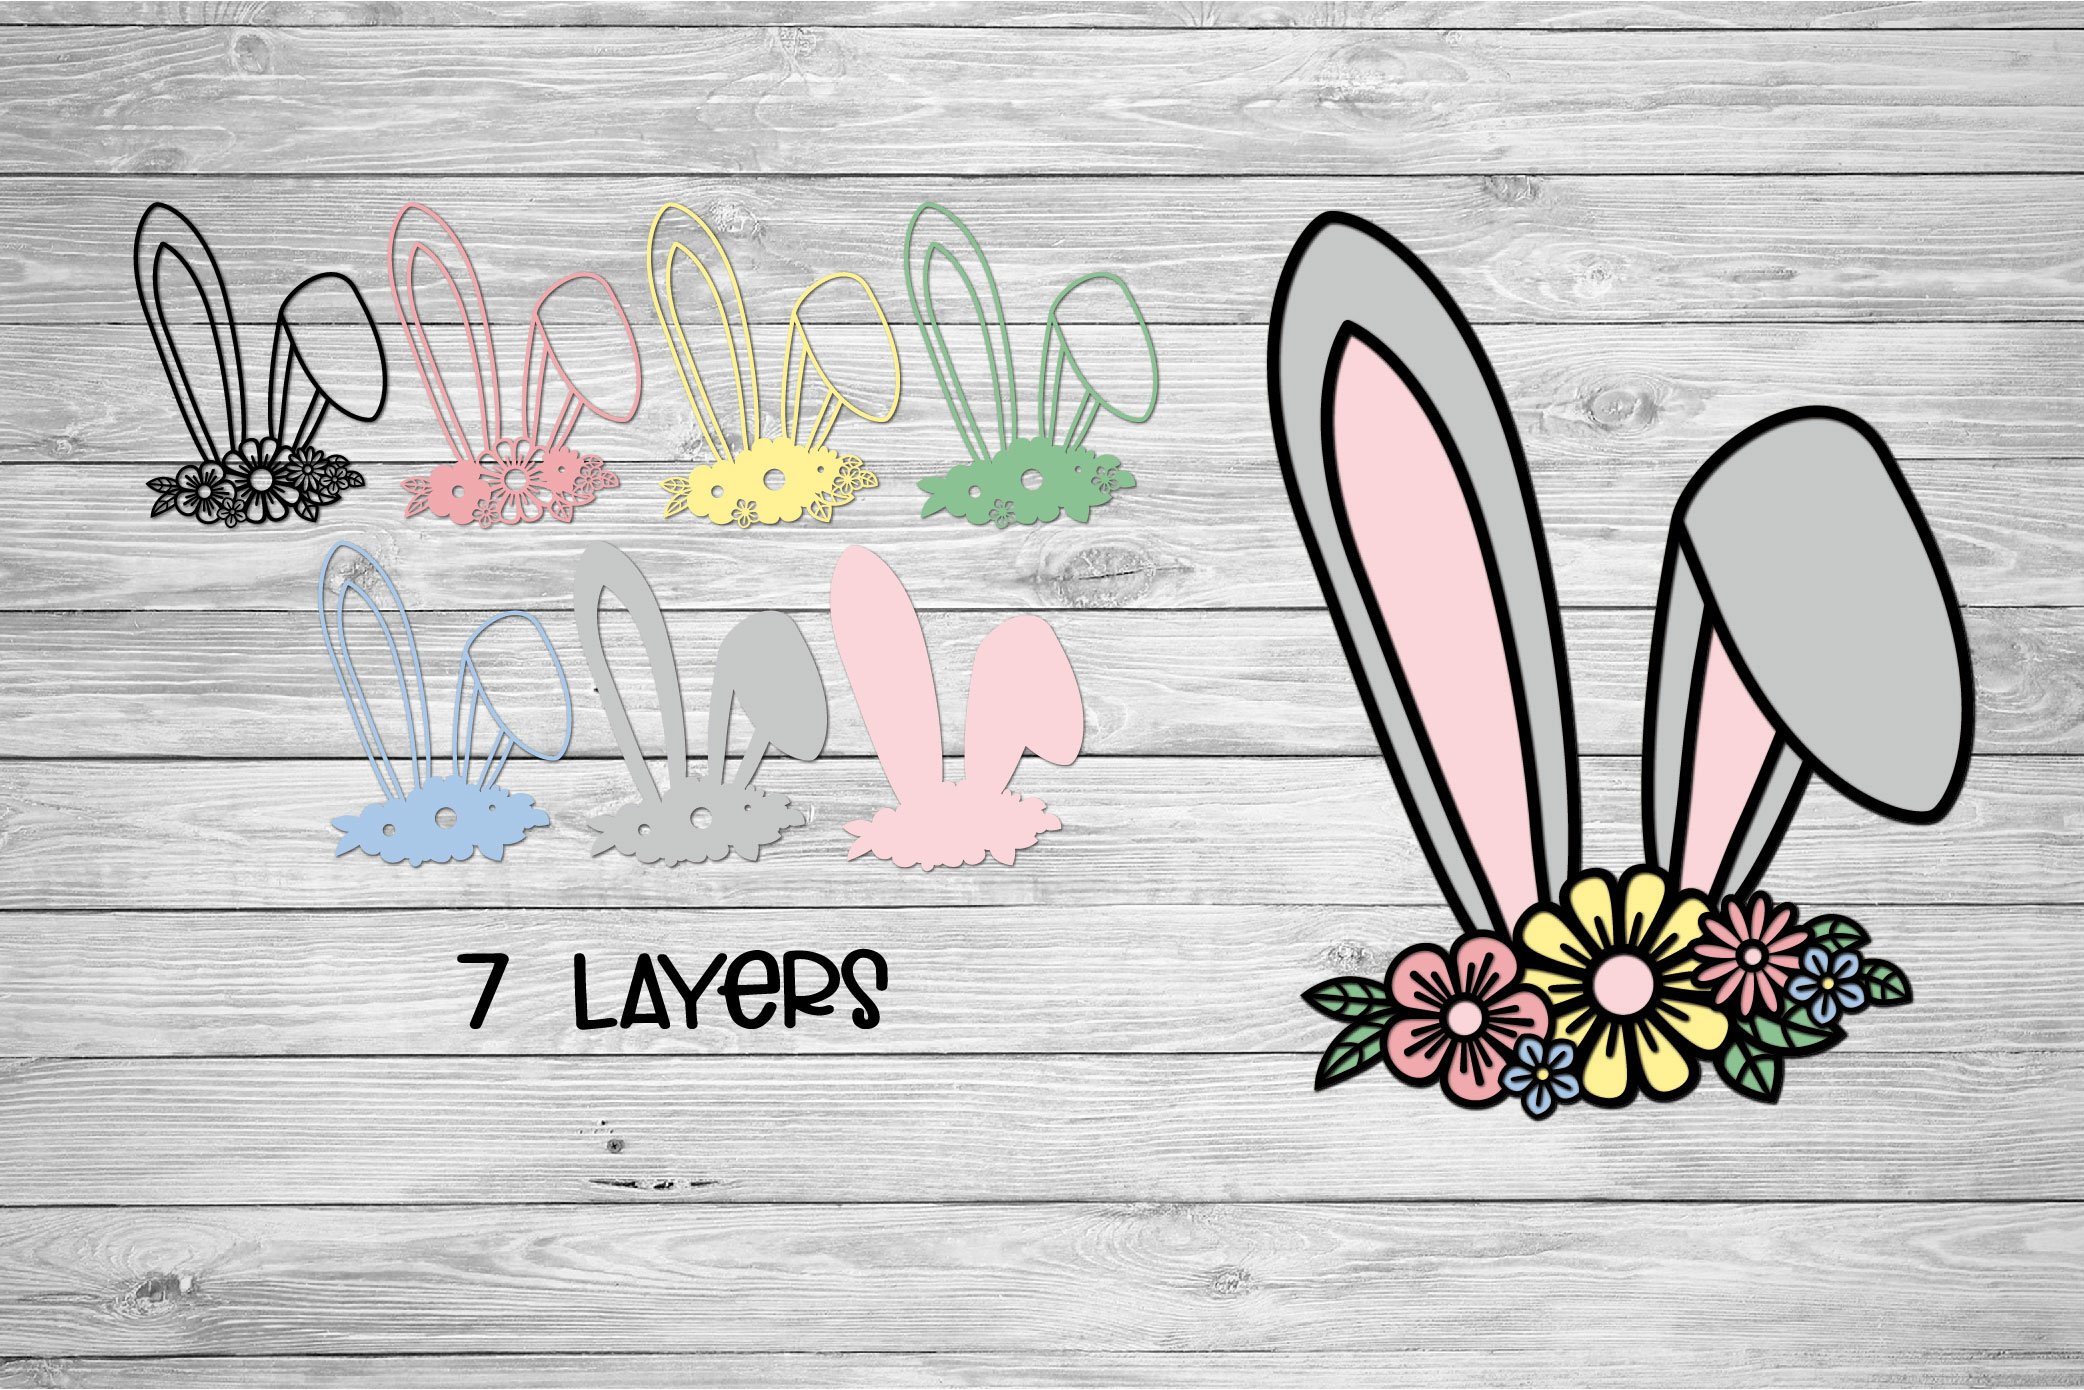 Grey wooden background with the diverse of the bunny ears.